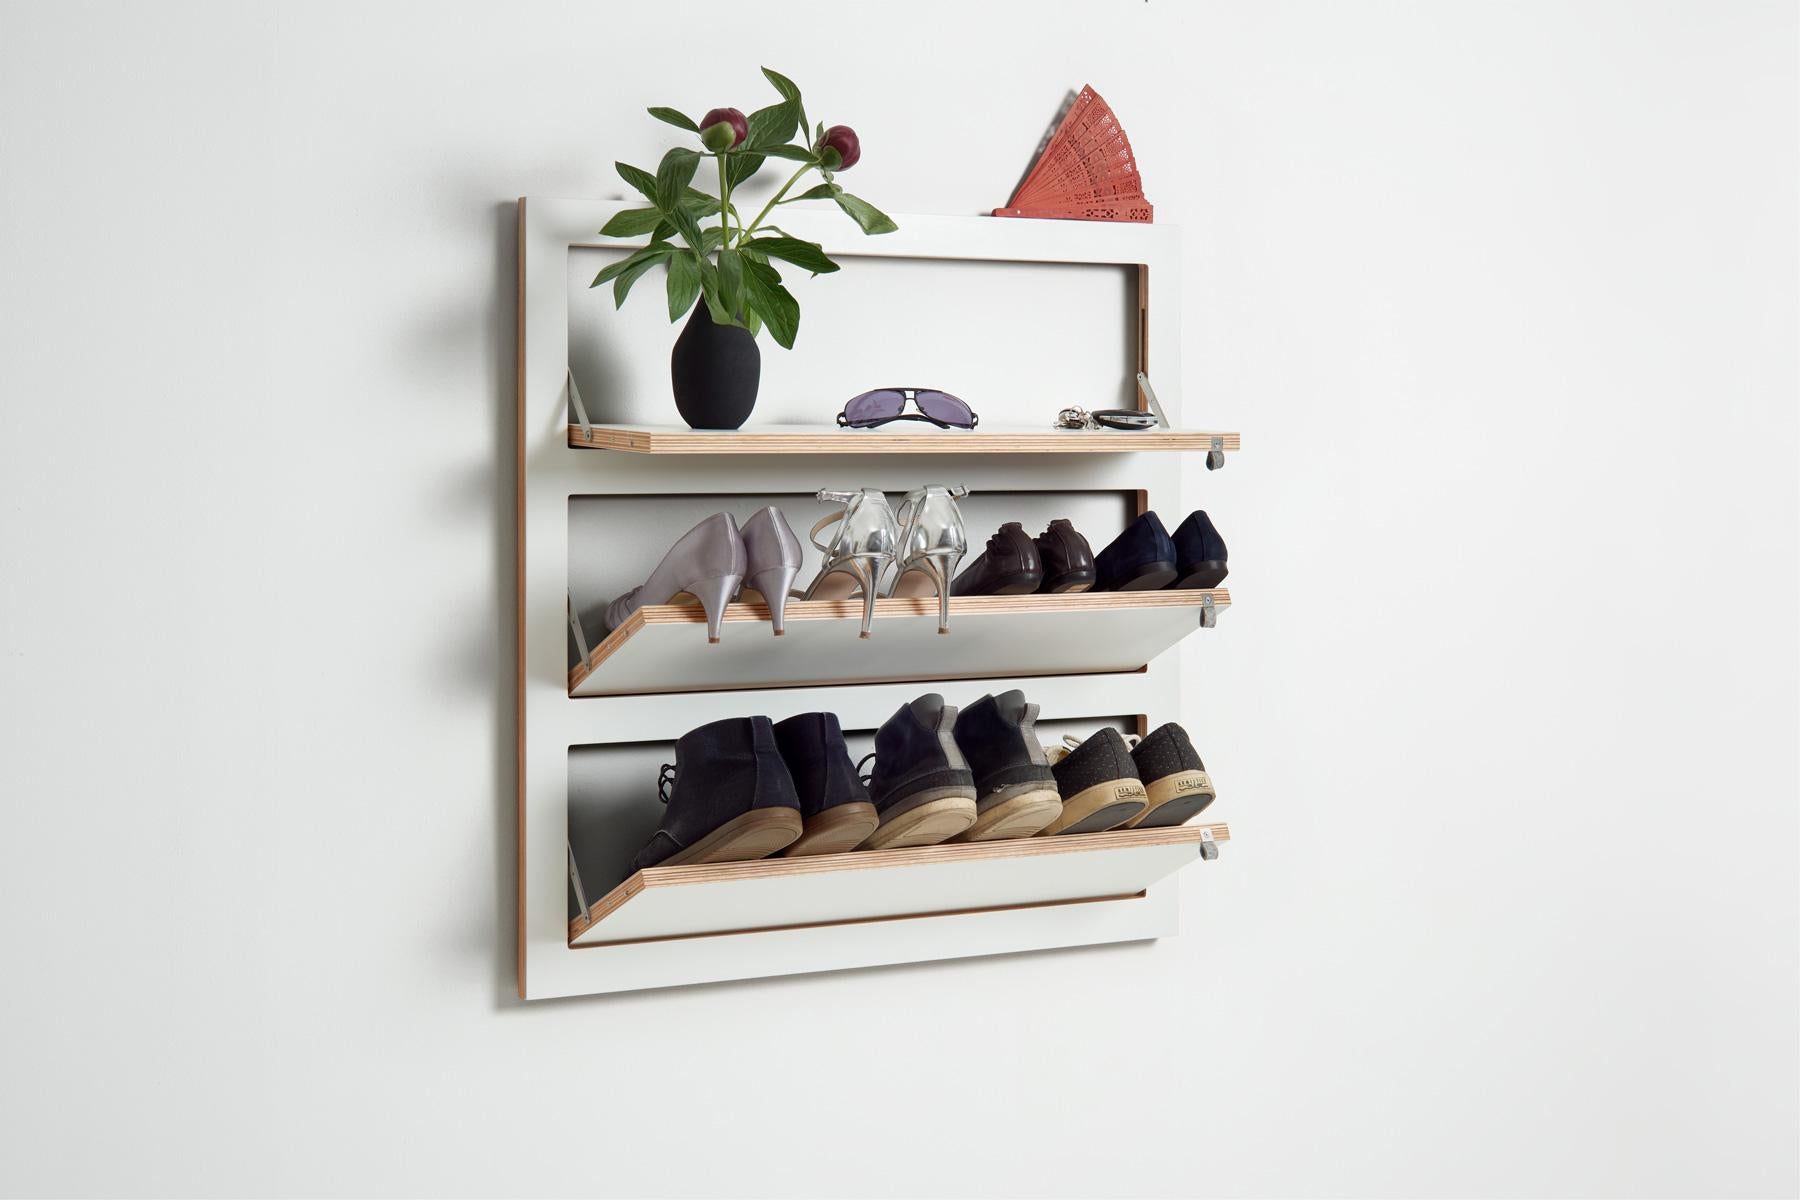 To eliminate mountains of shoes under the wardrobe, all Fläpps wall shelves with a small depth can now be conver- ted into a shoe shelf with a simple trick. By inserting small magnets in the rail of the hinges, the flaps of the shelves open only 45